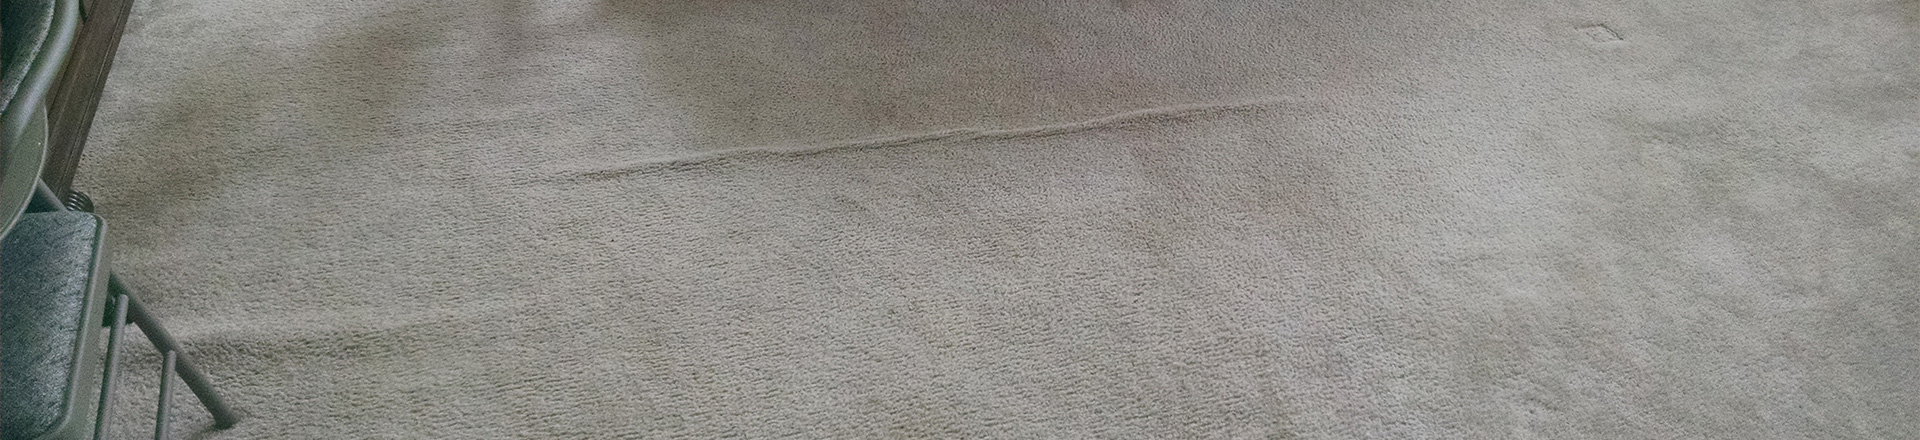 Why Should You Consider Carpet Re-Stretching